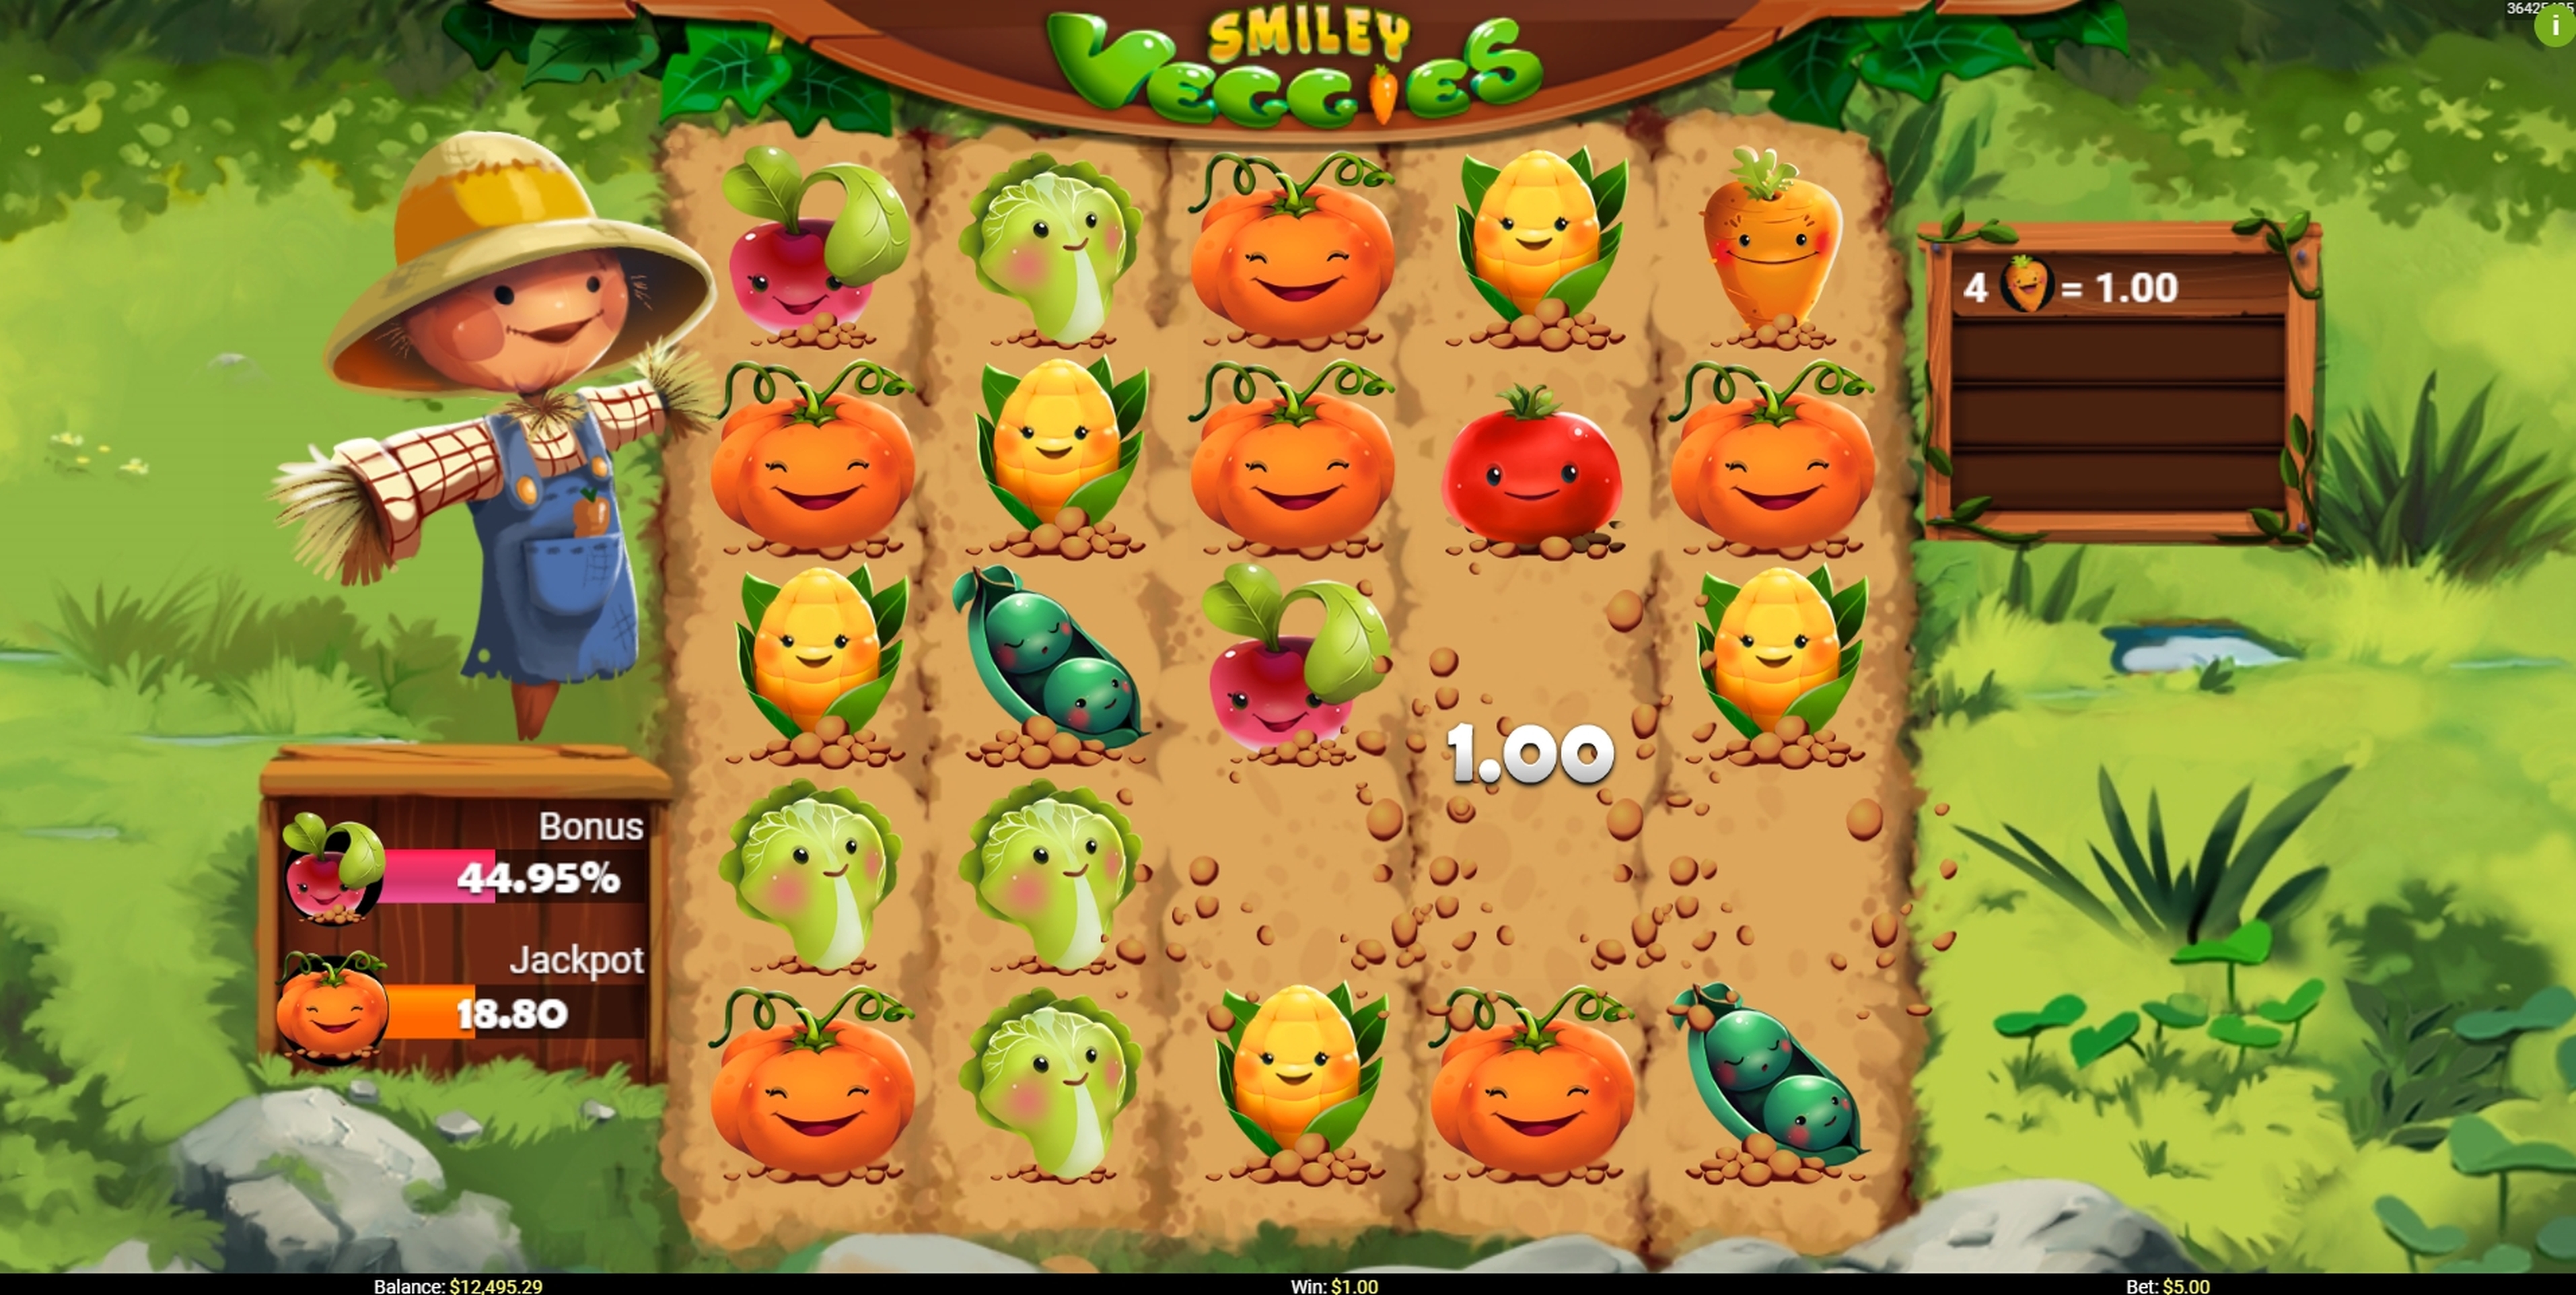 Win Money in Smiley Veggies Free Slot Game by Mobilots